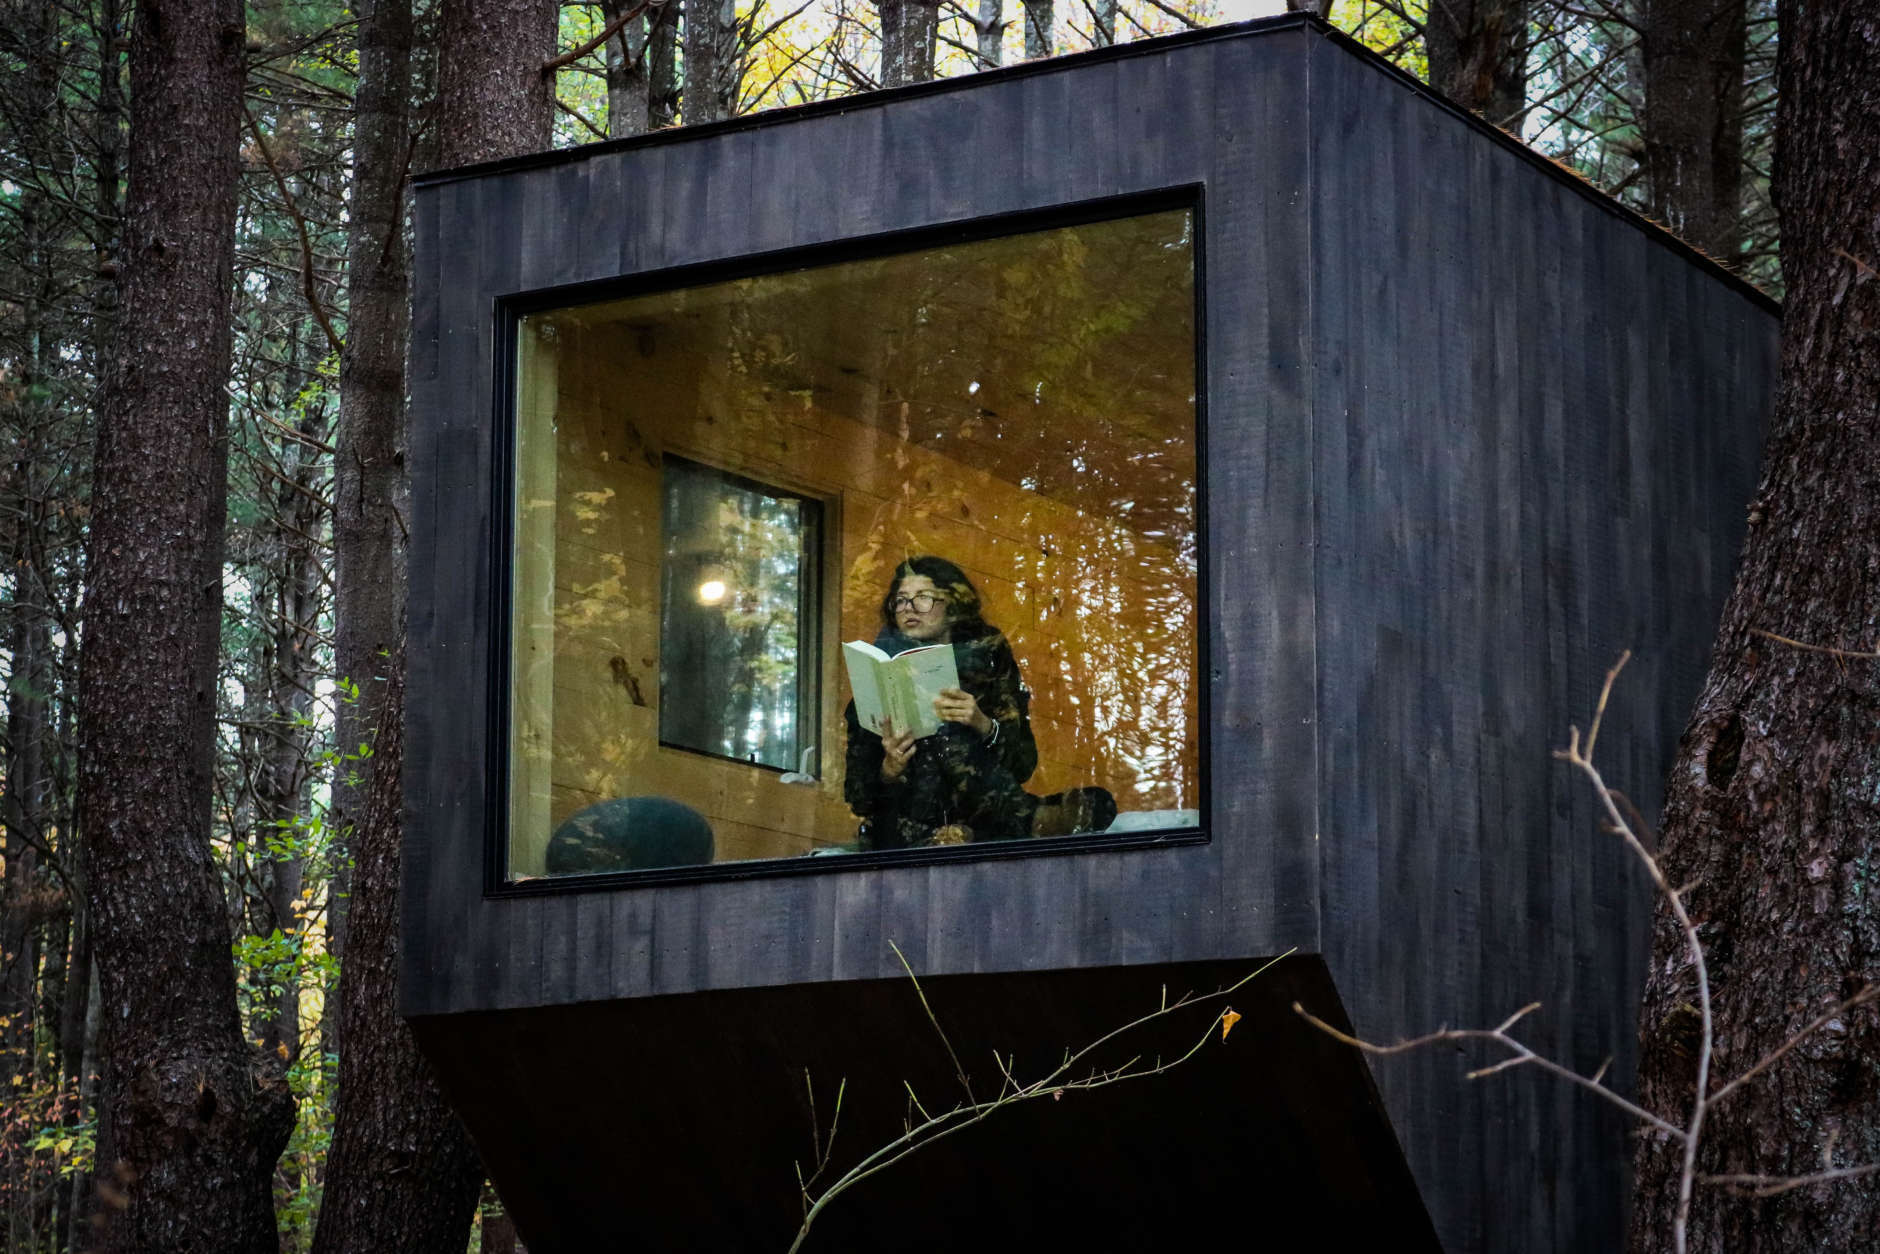 Jon Staff and Pete Davis, both Harvard graduates, established a refuge for stressed-out city dwellers with a collection of tiny houses on a plot of land in the woods. (Getaway/Vanessa Faria)